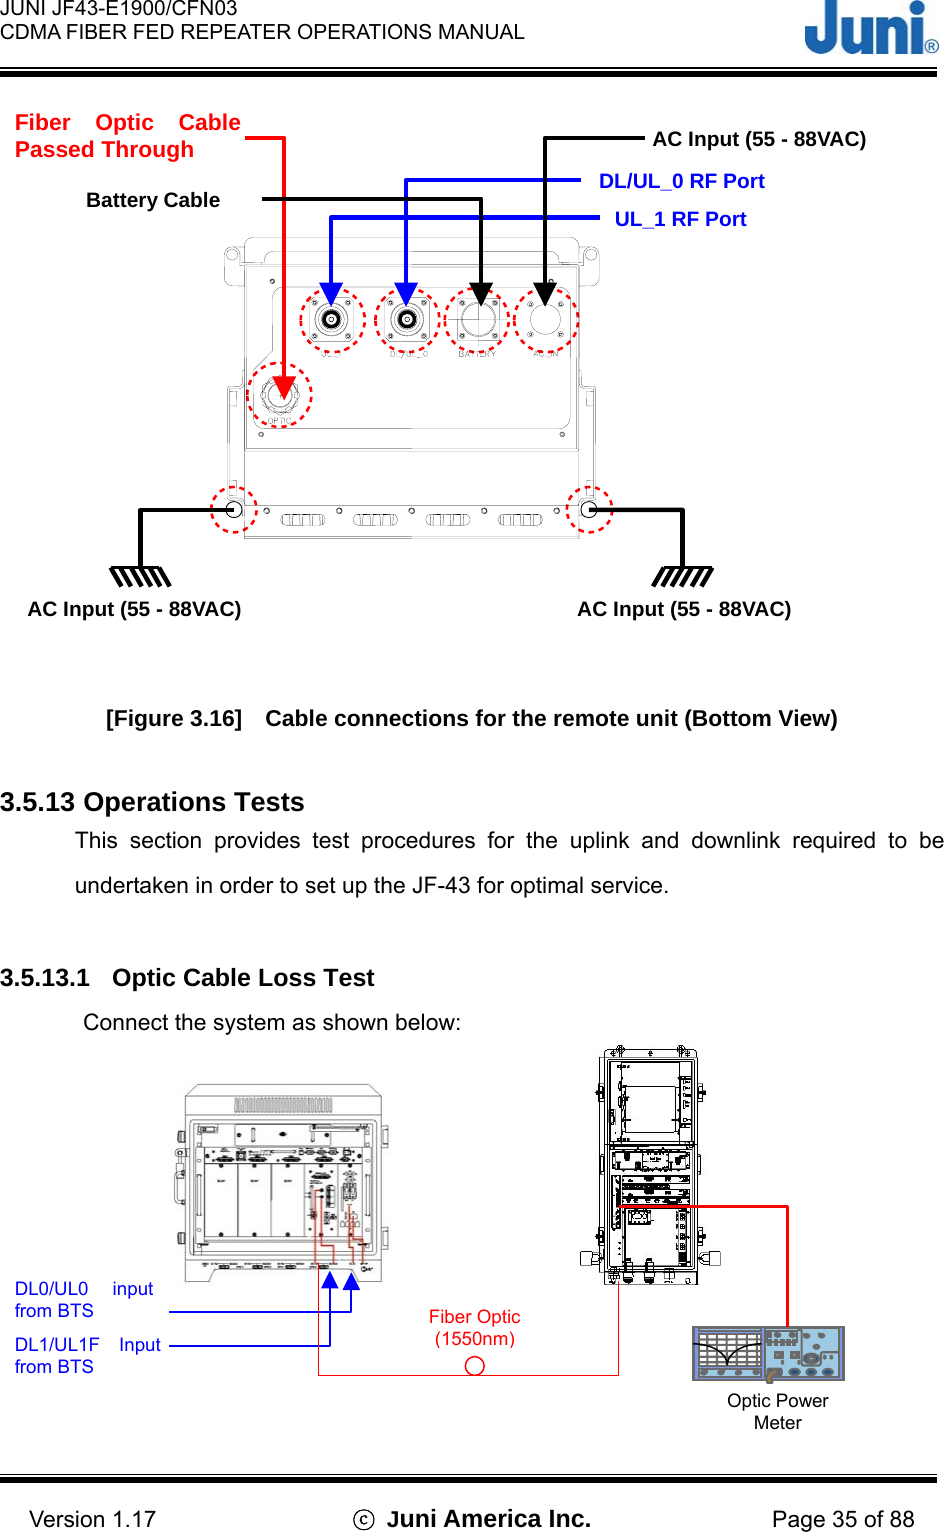  JUNI JF43-E1900/CFN03 CDMA FIBER FED REPEATER OPERATIONS MANUAL                                    Version 1.17  ⓒ Juni America Inc. Page 35 of 88  [Figure 3.16]    Cable connections for the remote unit (Bottom View)  3.5.13 Operations Tests This section provides test procedures for the uplink and downlink required to be undertaken in order to set up the JF-43 for optimal service.    3.5.13.1  Optic Cable Loss Test Connect the system as shown below:  Fiber Optic (1550nm)DL1/UL1F Inputfrom BTS   DL0/UL0 inputfrom BTS Optic Power Meter Fiber Optic CablePassed Through UL_1 RF Port DL/UL_0 RF Port AC Input (55 - 88VAC) Battery Cable AC Input (55 - 88VAC) AC Input (55 - 88VAC) 